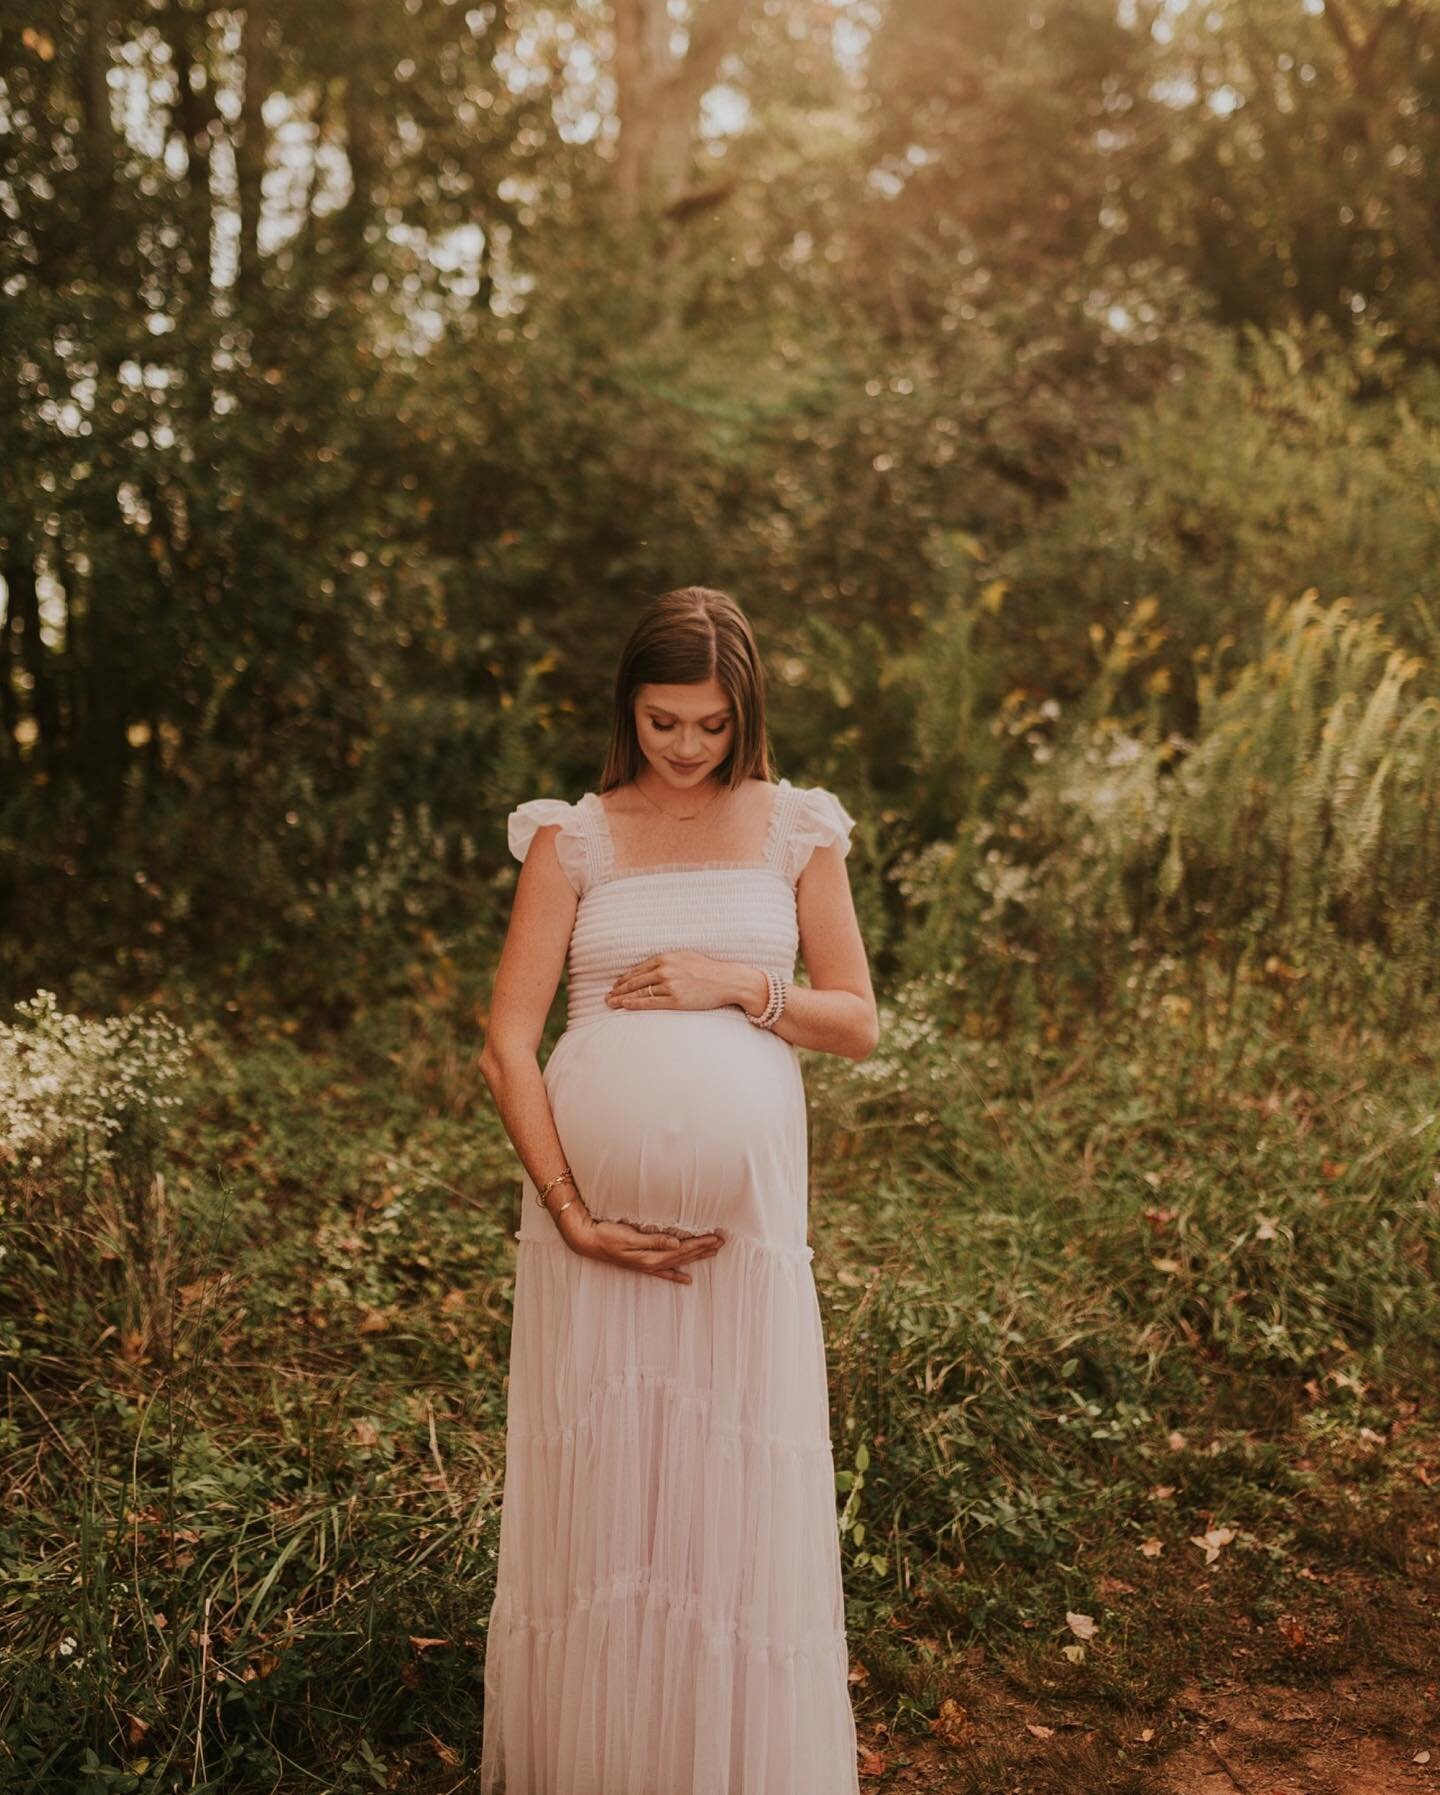 This sweet baby girl will be here before we know it 🫶🏼✨ so thankful this family has trusted me the past 5 years and document all these special times in their lives 🥹 | #christanallenphotography #maternity #lookslikefilm #greengreengreen #charlotte